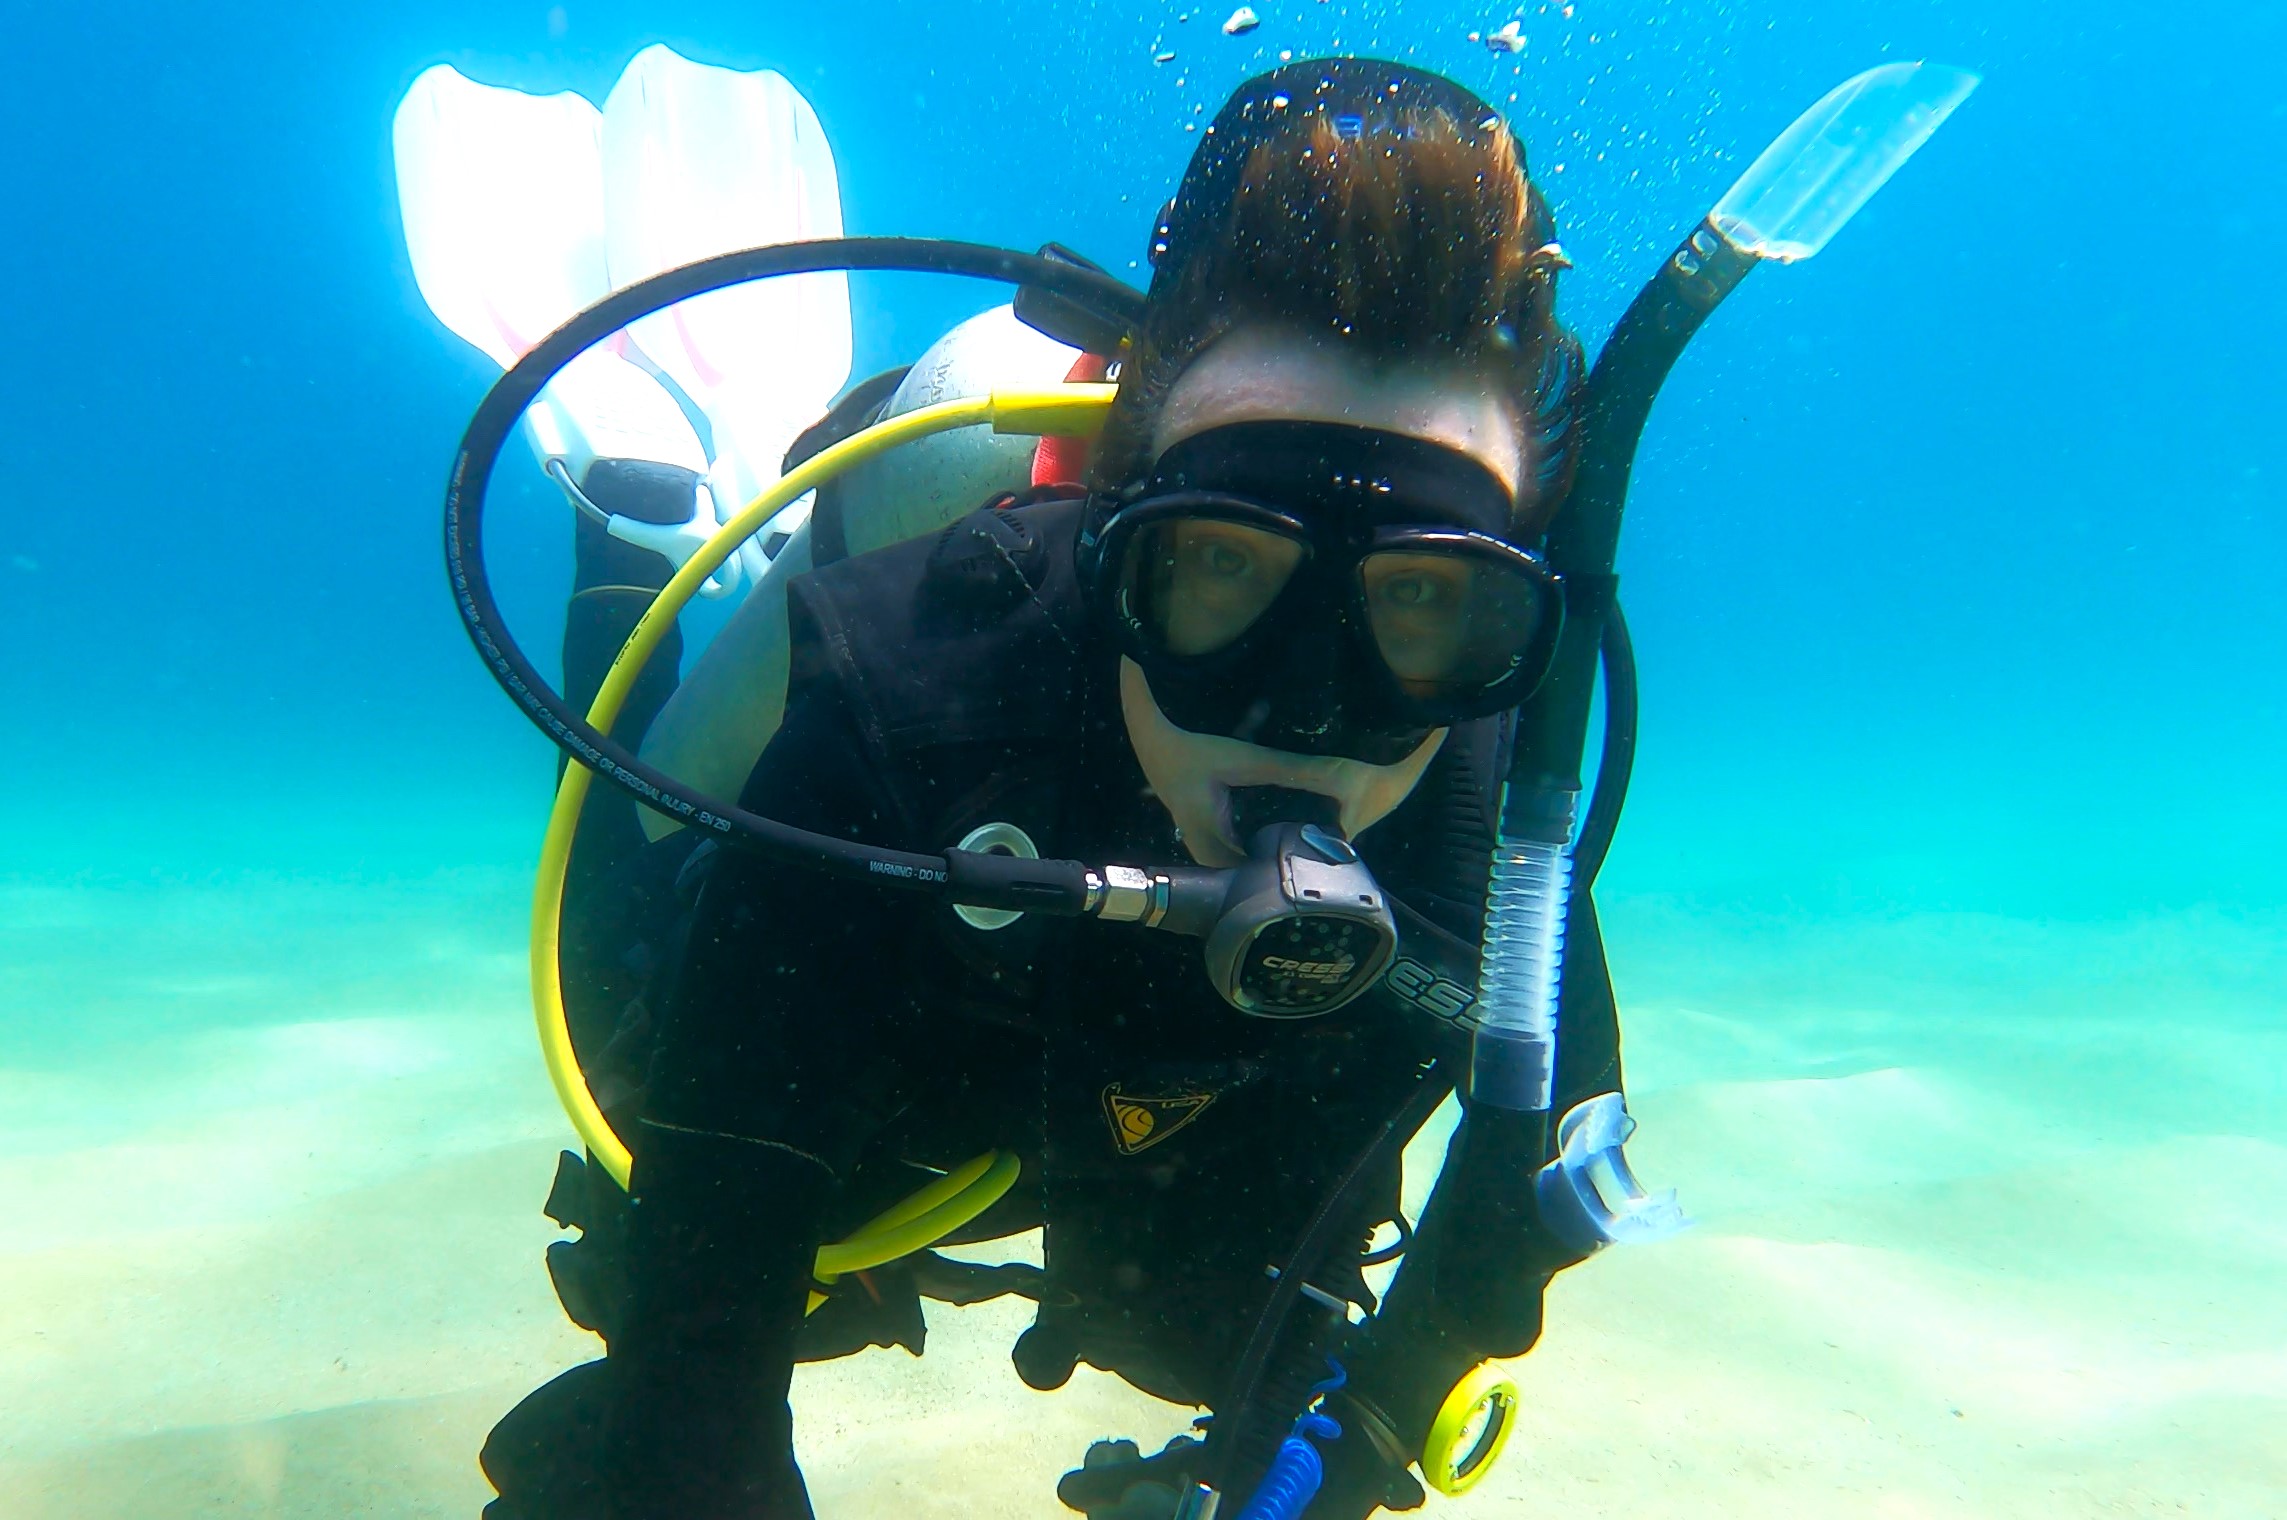 10 Essential Safety Rules to Become a Confident Scuba Diver